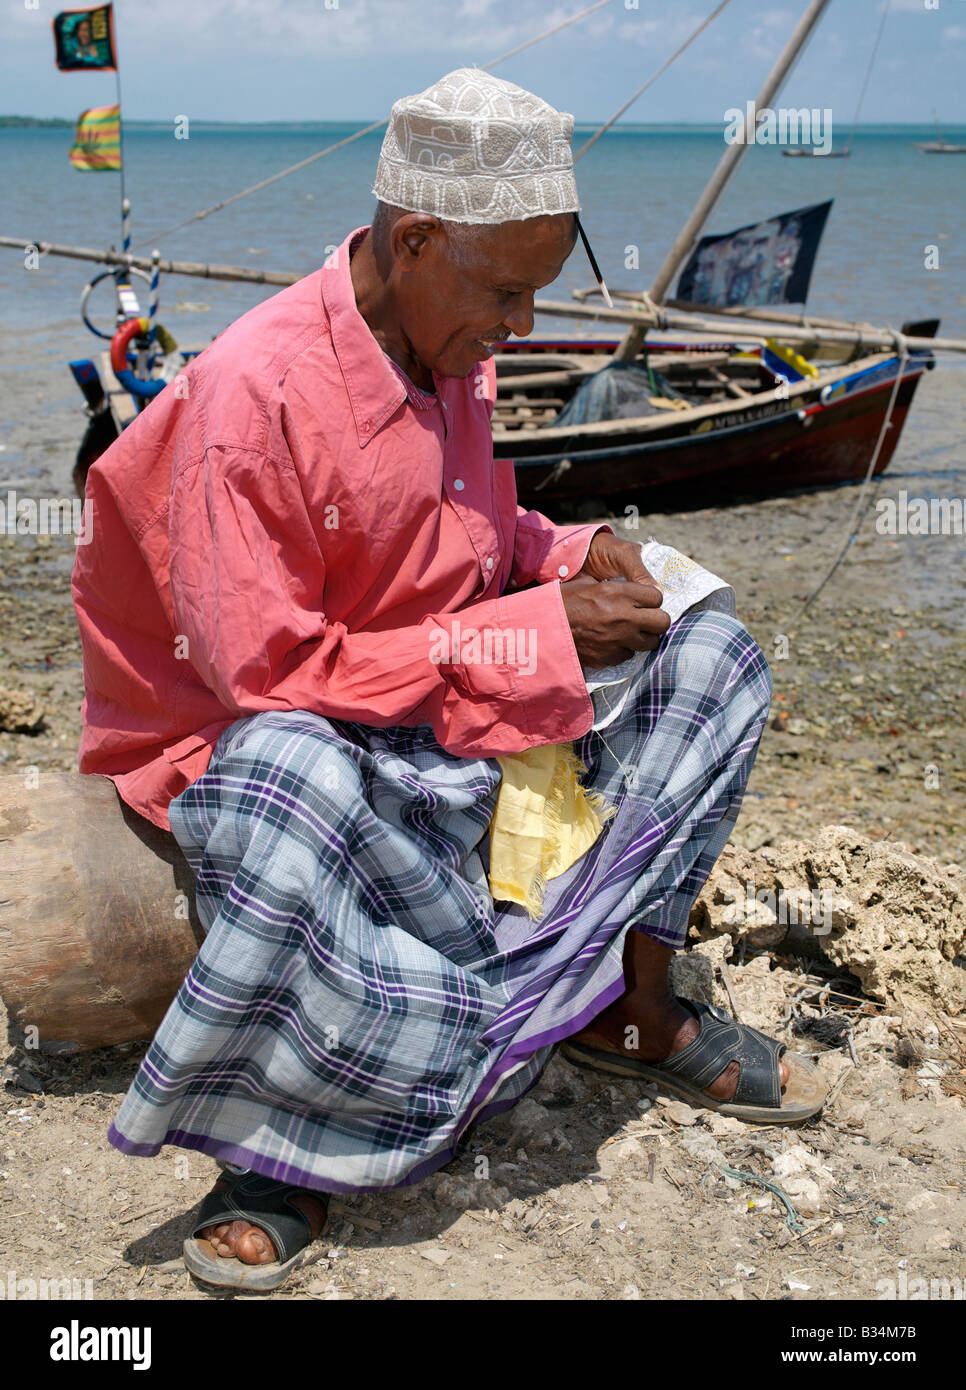 Kenya, Kisingitini, Pate Island. A man embroiders a Swahili hat along the waterfront at Kisingitini, a natural harbour on Pate Island. It takes hours of patience and great skill to finish a really fine hat, which will be prized by Muslims throughout the Lamu Archipelago and elsewhere. Kisingitini is the centre of the island's fishing industry with crayfish being the fishermen's prized catch. The island is the largest of the Lamu Archipelago lying in the Indian Ocean just north of Lamu and 150 miles north-northeast of Mombasa. Stock Photo